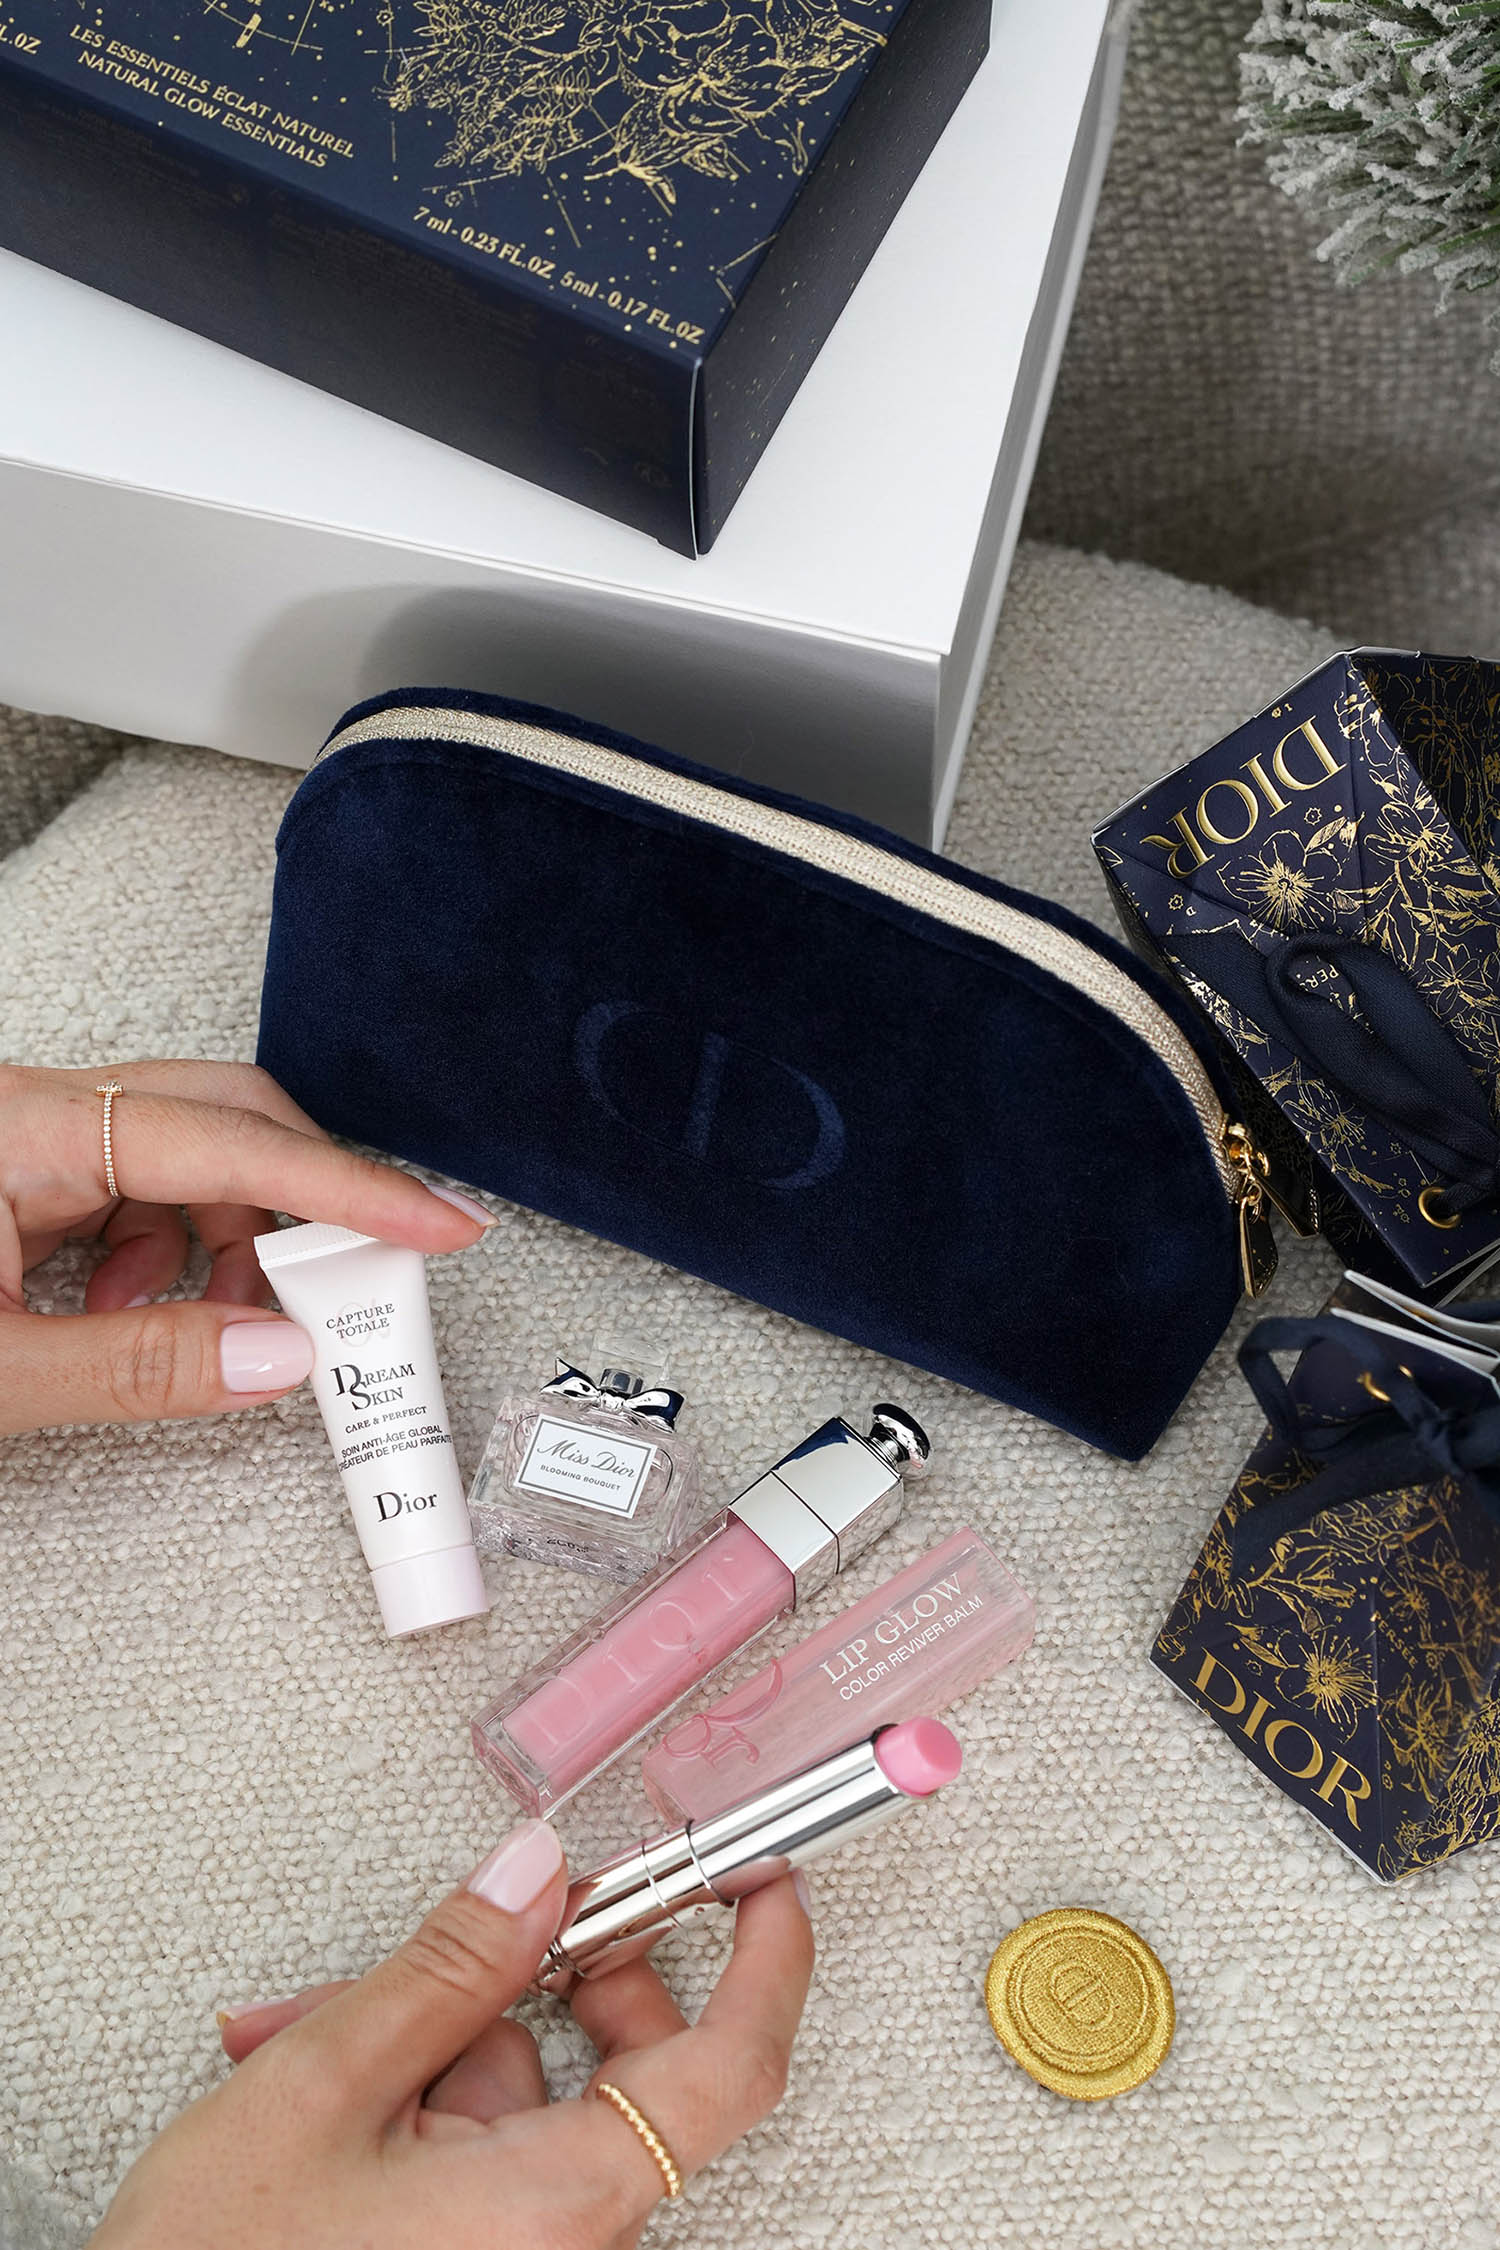 Give Dior Backstage Face & Body Perfector - Holiday Gift Idea